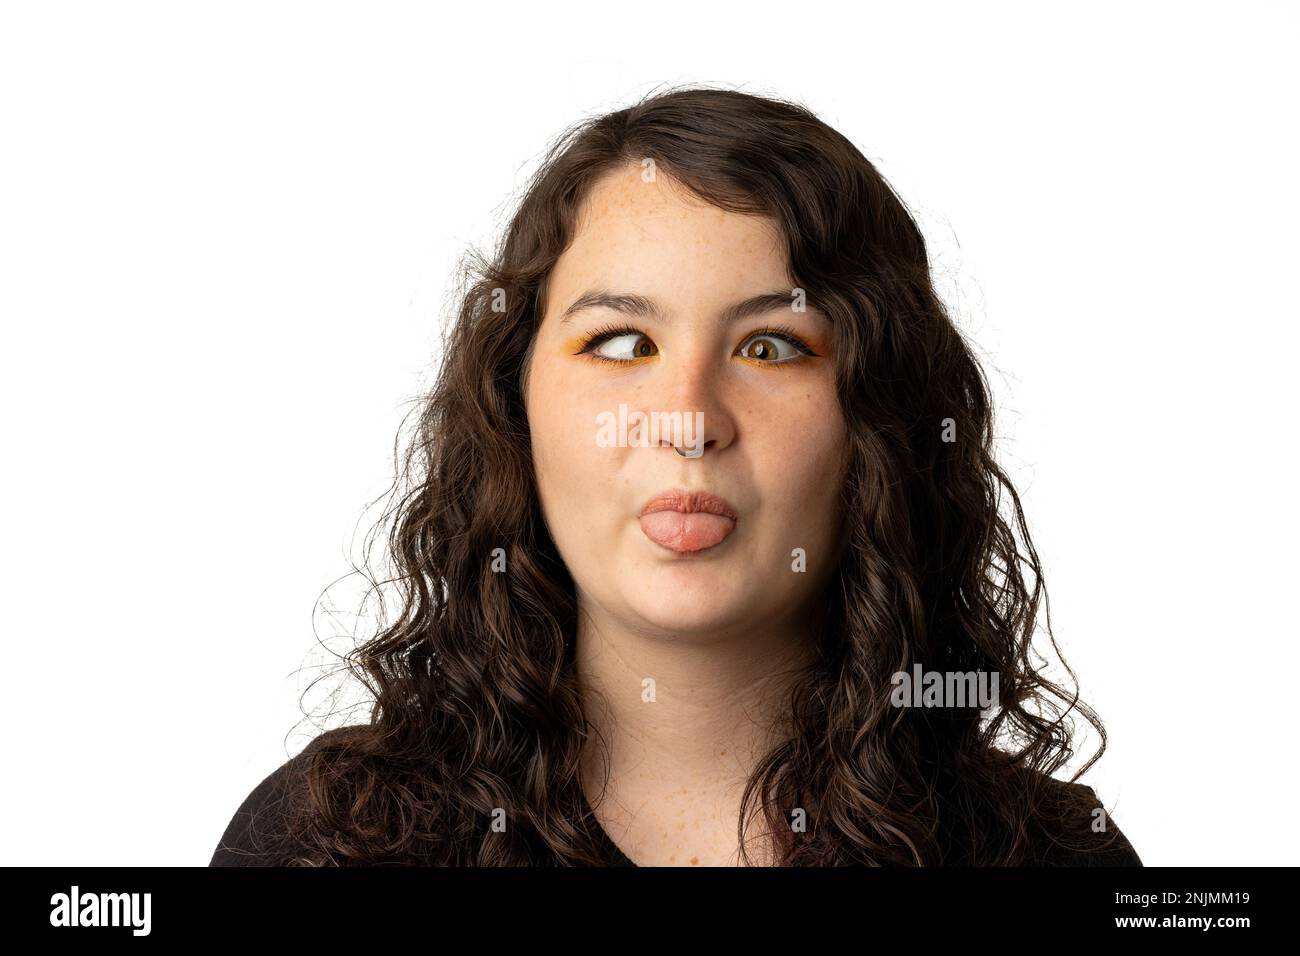 Young woman making a goofy face  and sticking out tongue, isolated on white background. Stock Photo